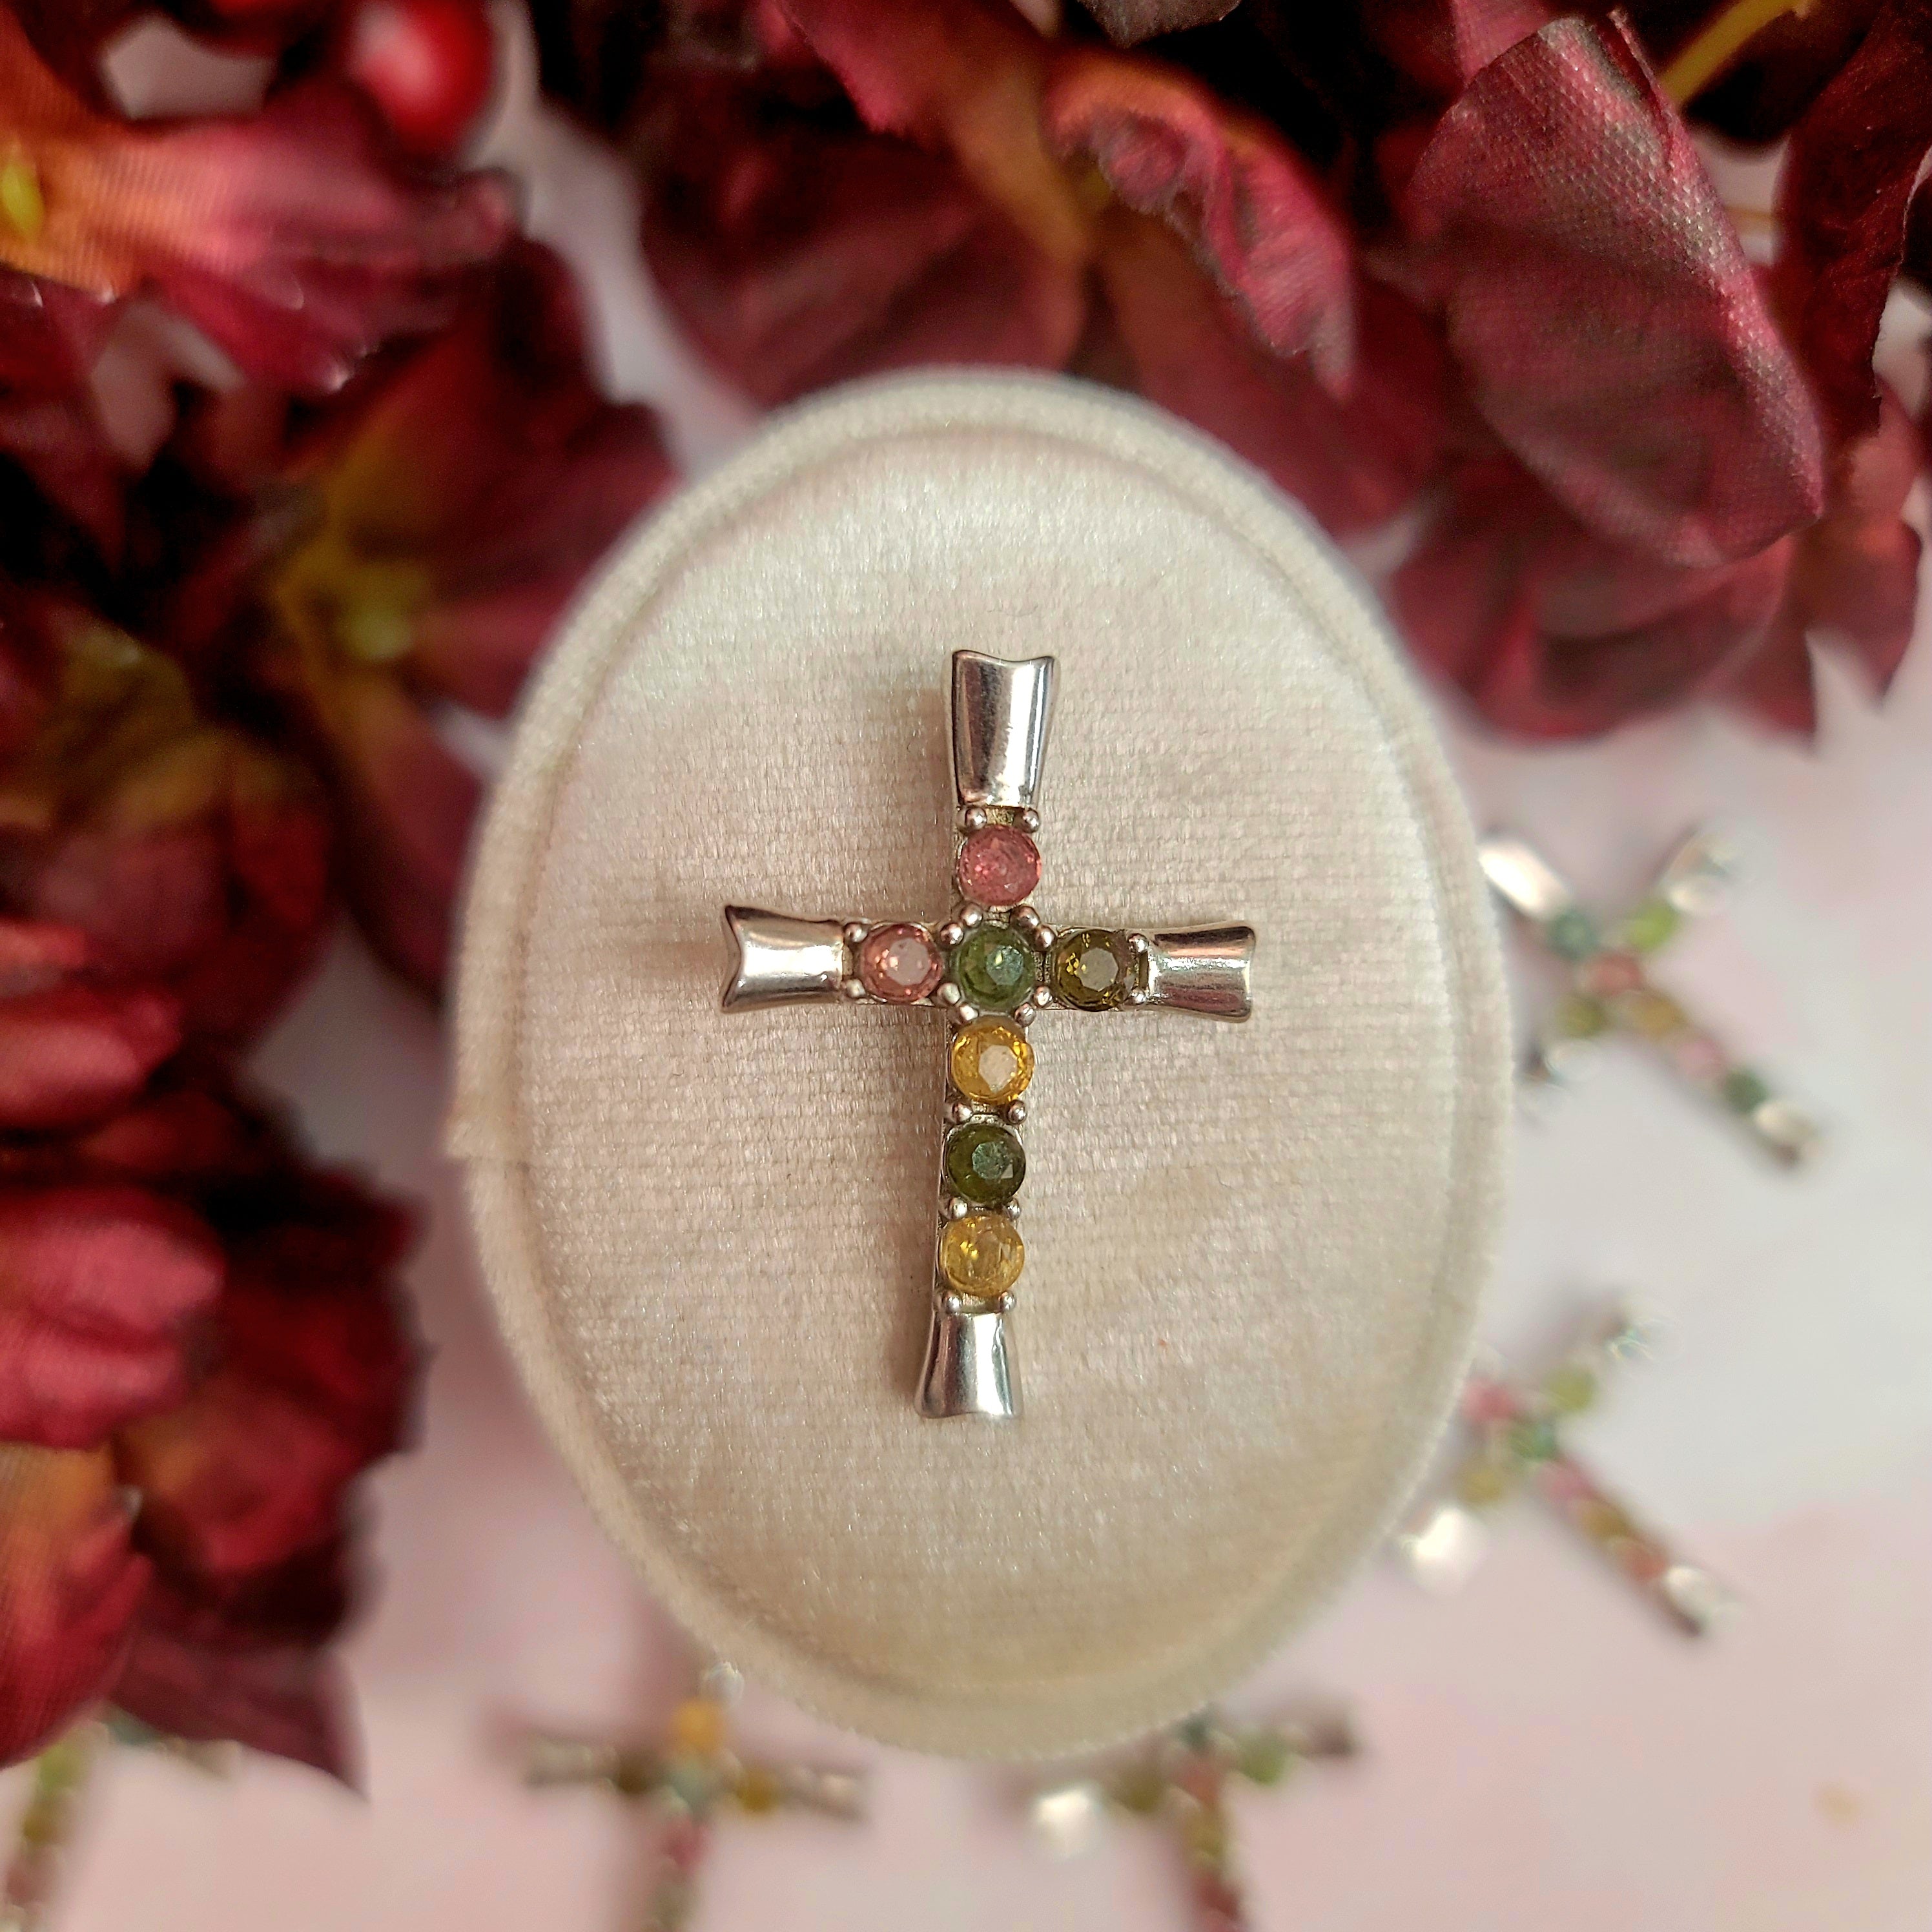 Tourmaline Cross Pendant for Removing Insecurities and Helping Inspire Creativity